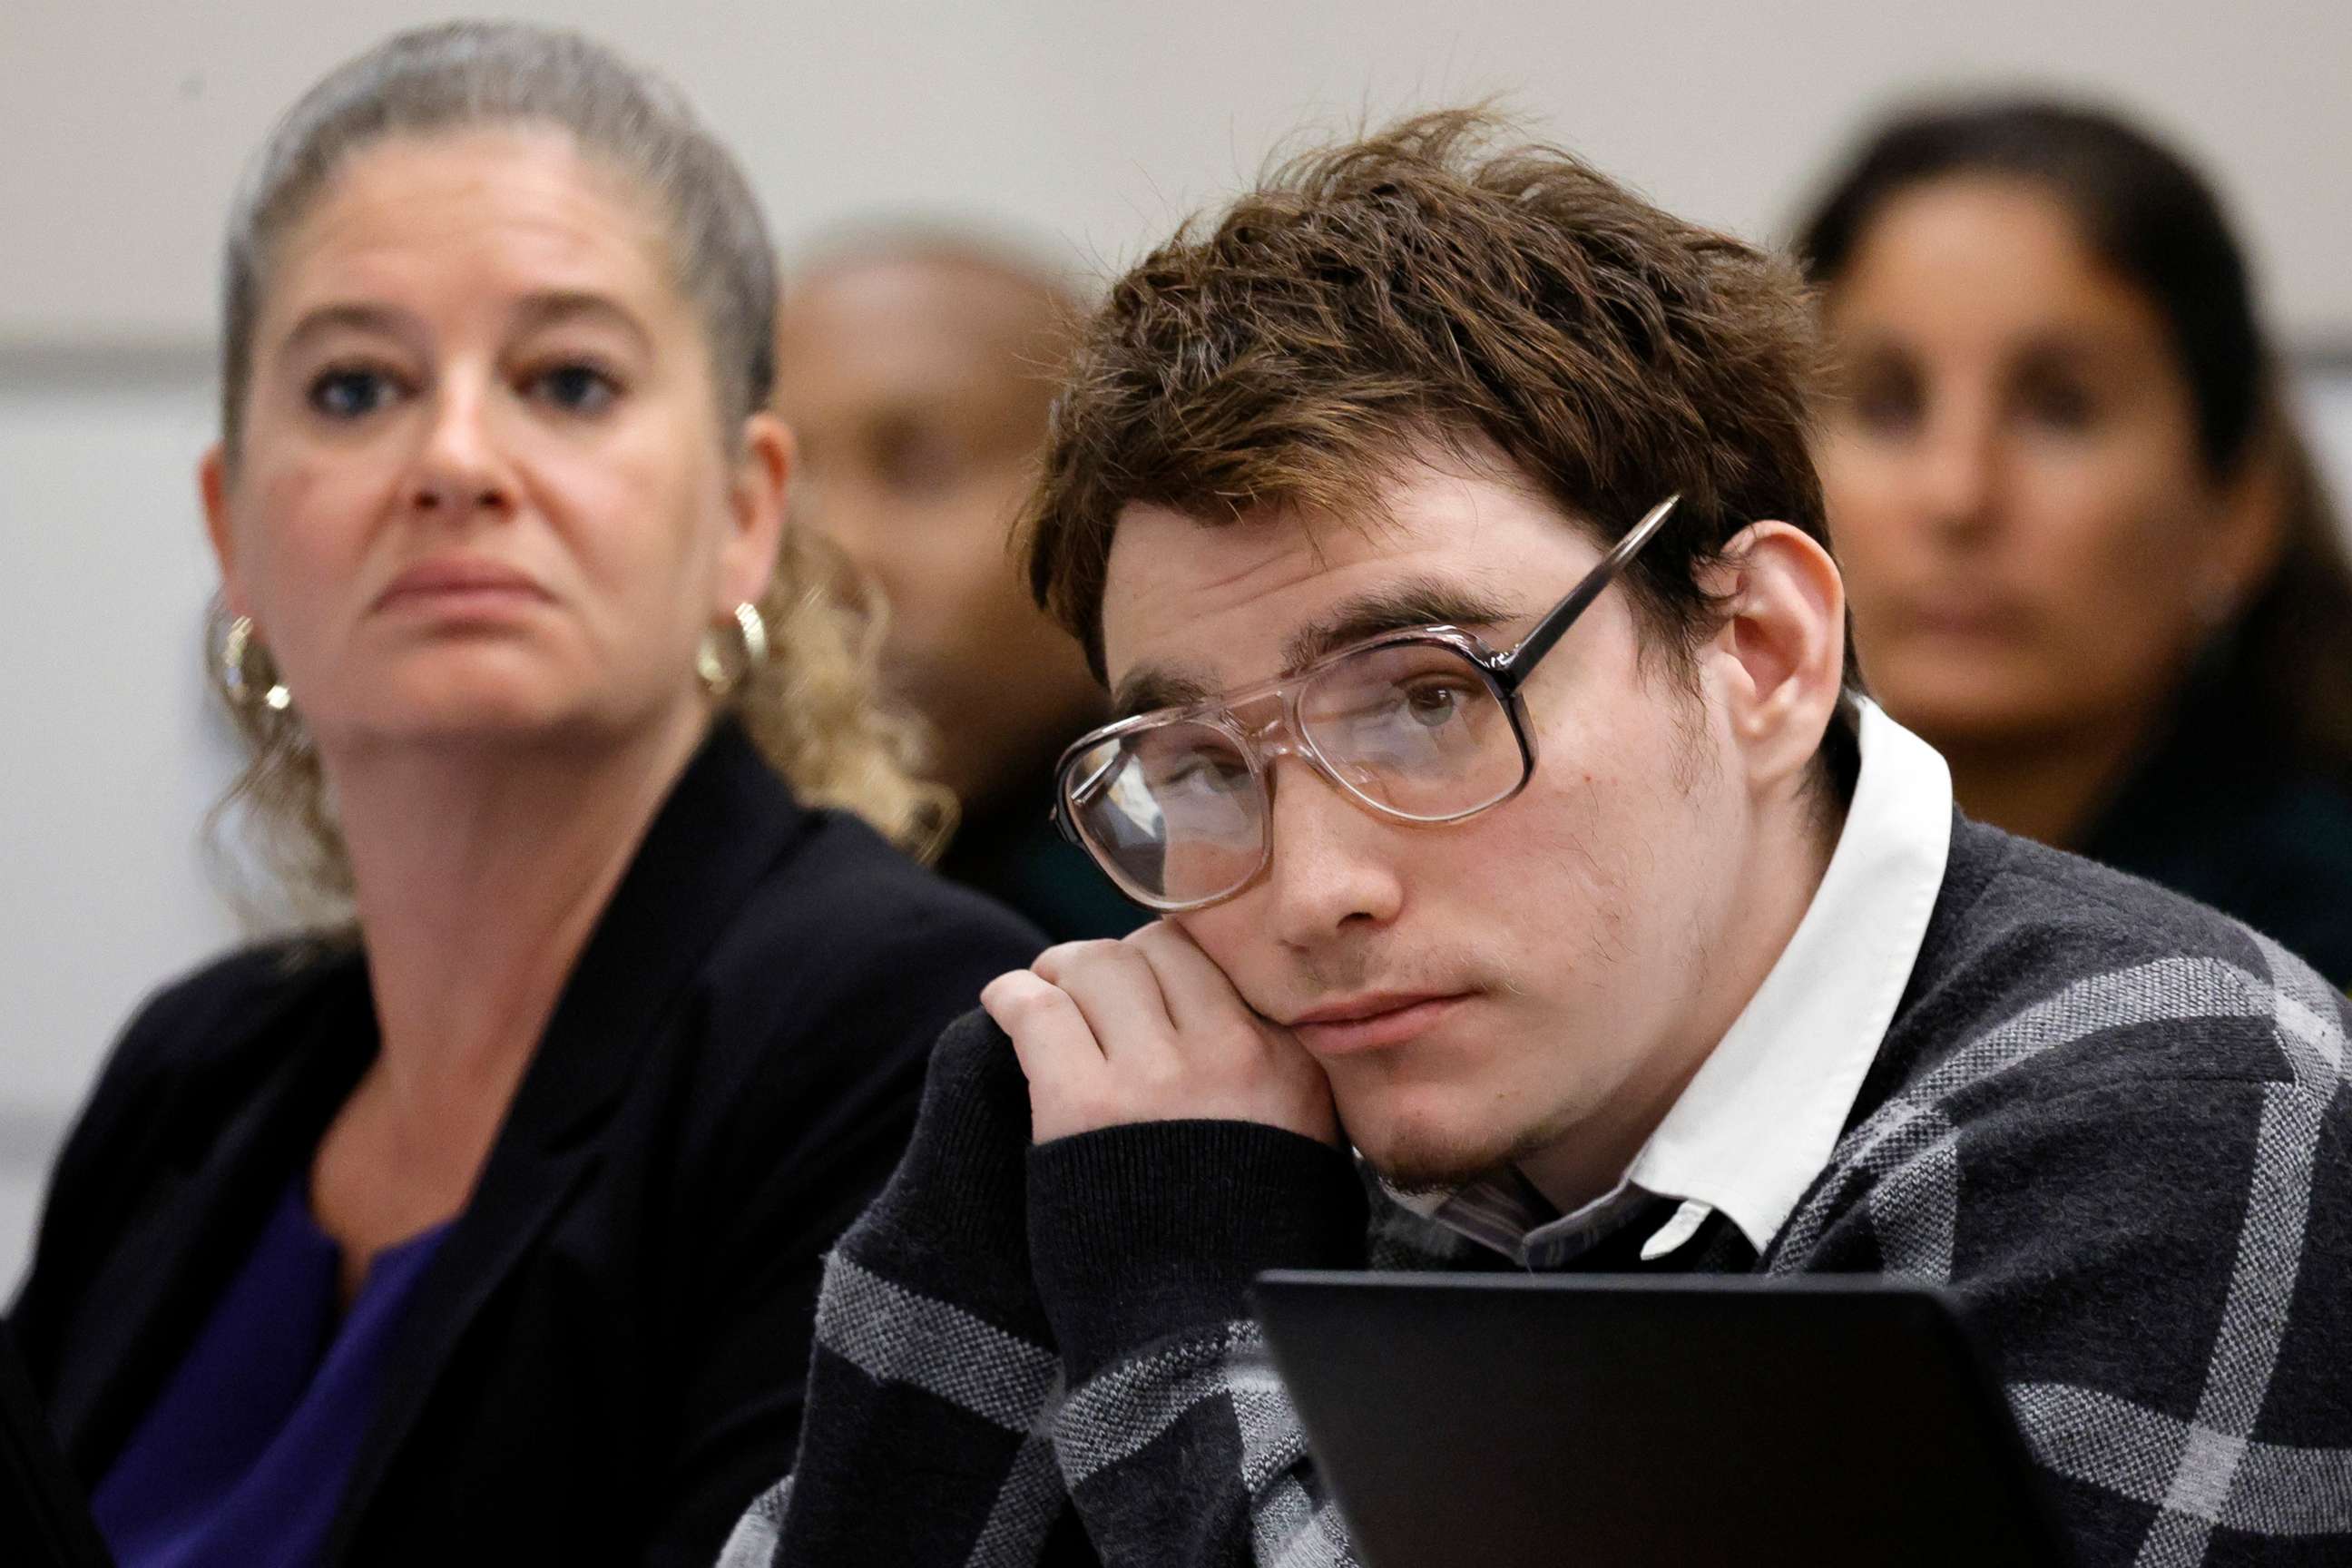 PHOTO: Nikolas Cruz is shown at the defense table during the penalty phase of the trial of  Marjory Stoneman Douglas High School shooter Nikolas Cruz at the Broward County Courthouse, Sept. 14, 2022, in Fort Lauderdale, Fla. 